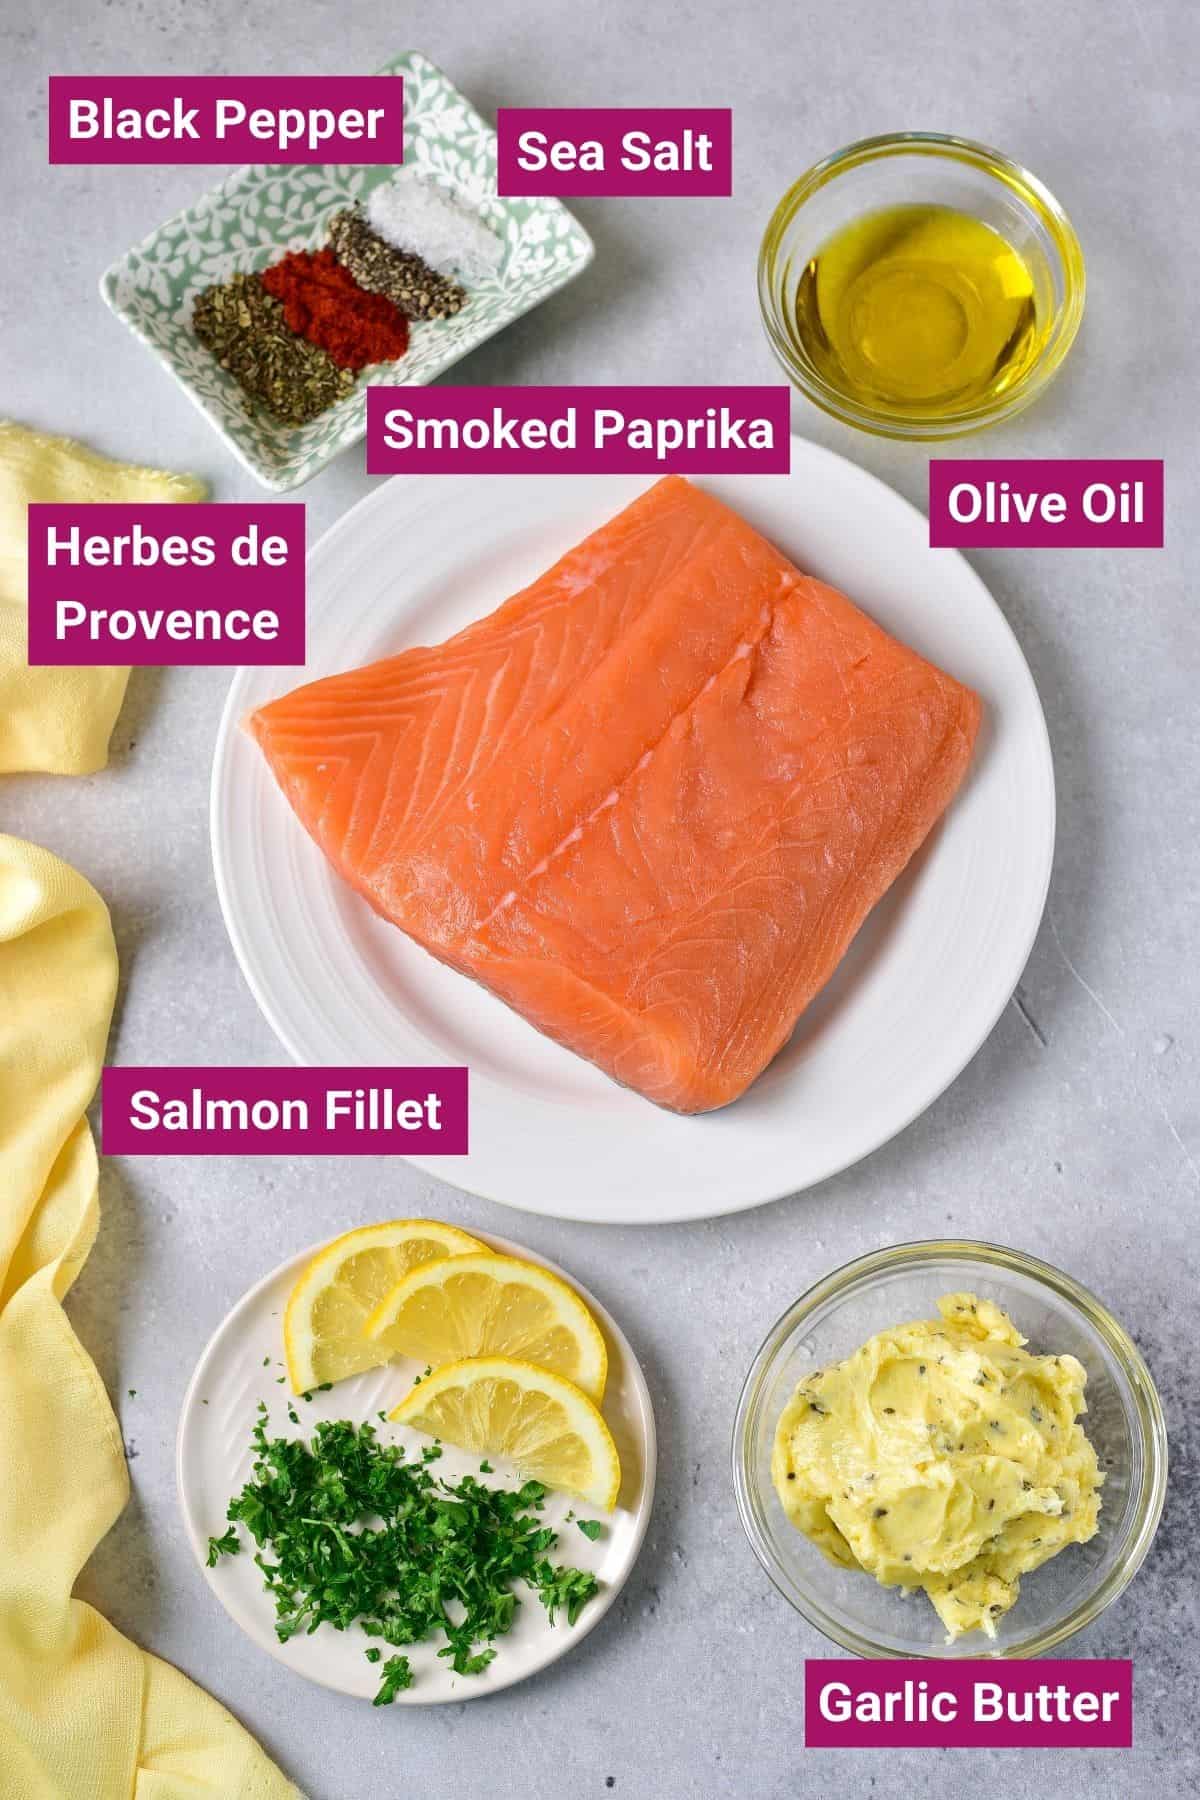 olive oil, black pepper, sea salt, smoked paprika, herbes de provence, salmon fillet and garlic butter on separate containers